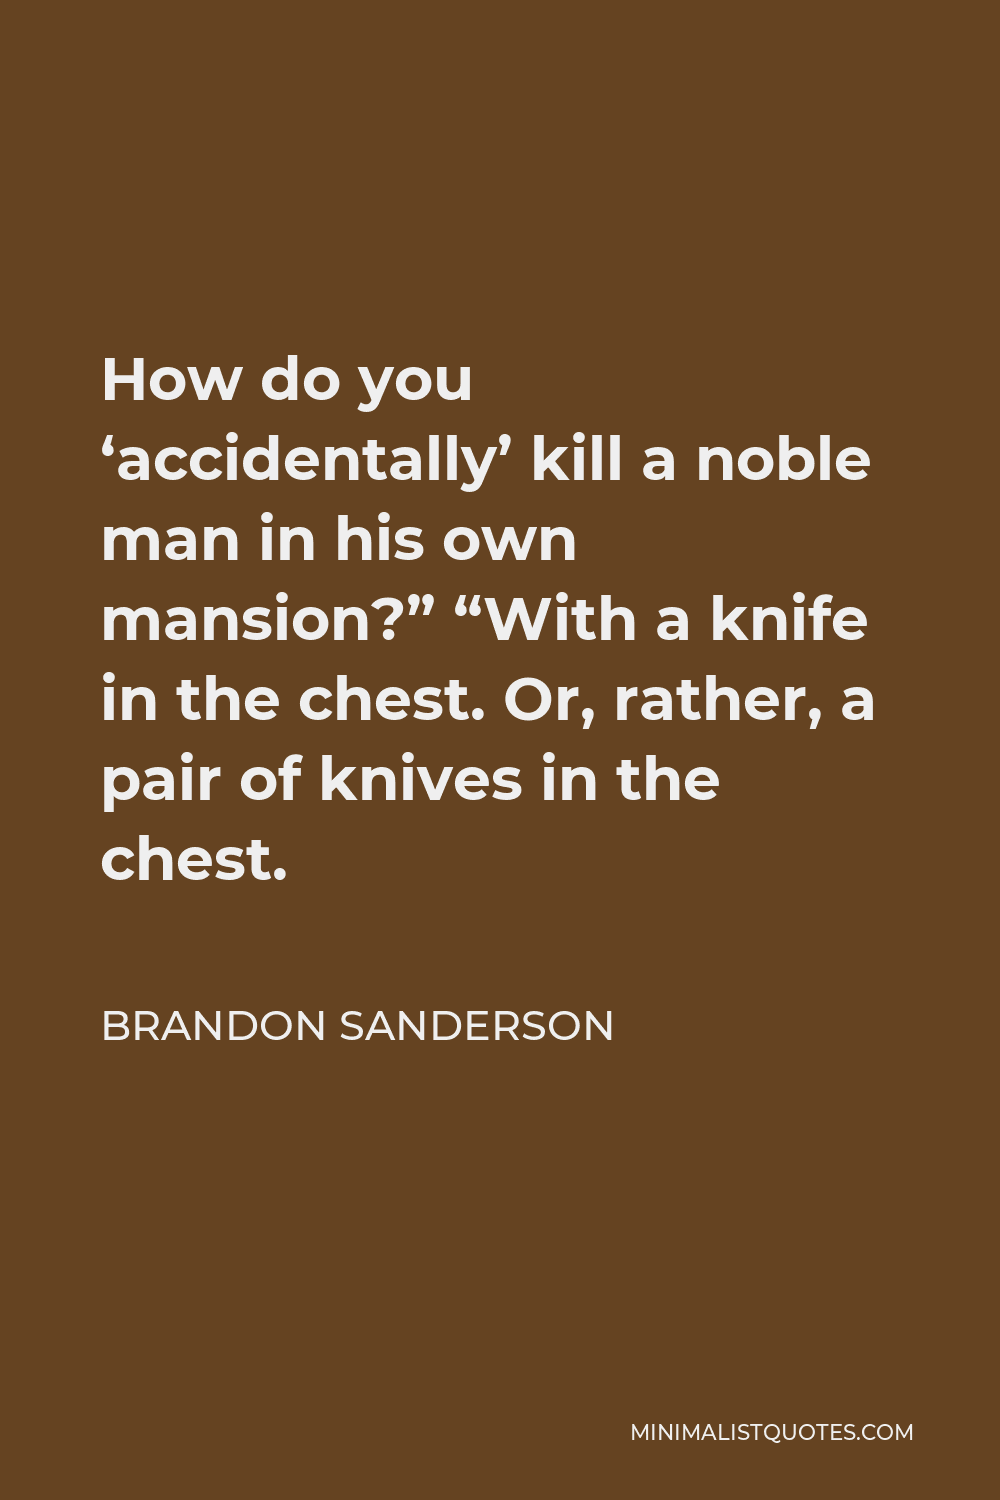 Brandon Sanderson Quote - How do you ‘accidentally’ kill a noble man in his own mansion?” “With a knife in the chest. Or, rather, a pair of knives in the chest.